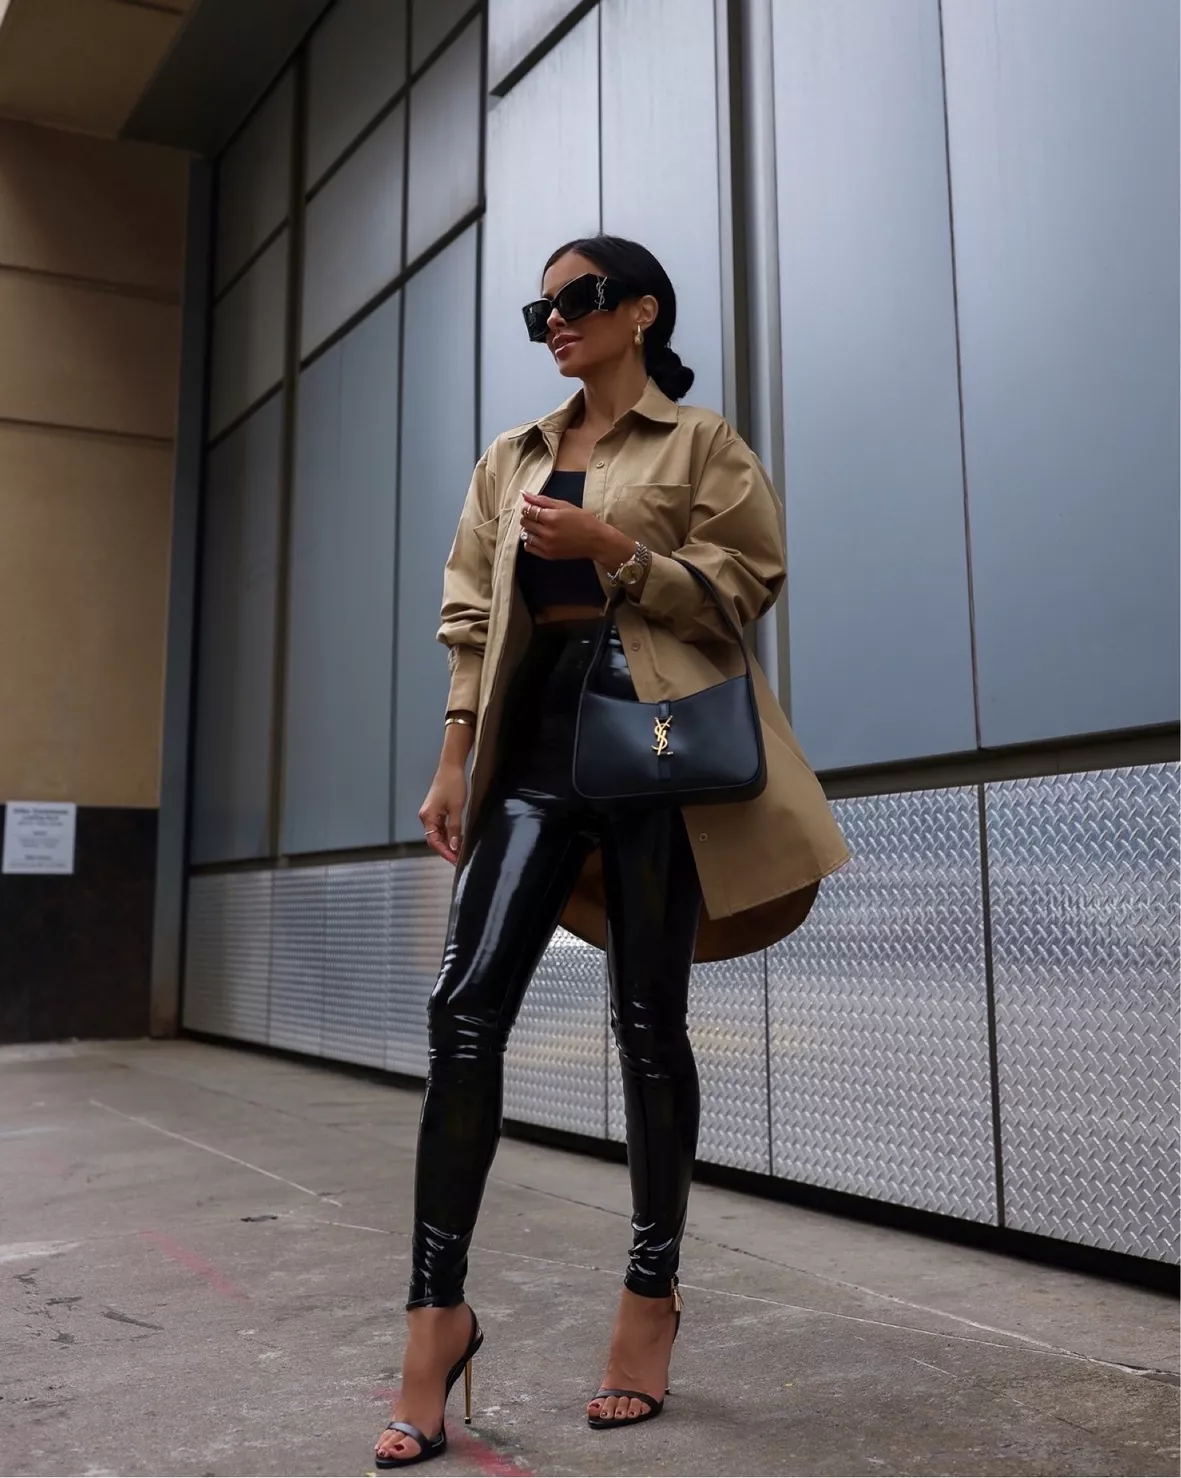 Chic Leather Leggings for a Stylish Date Night